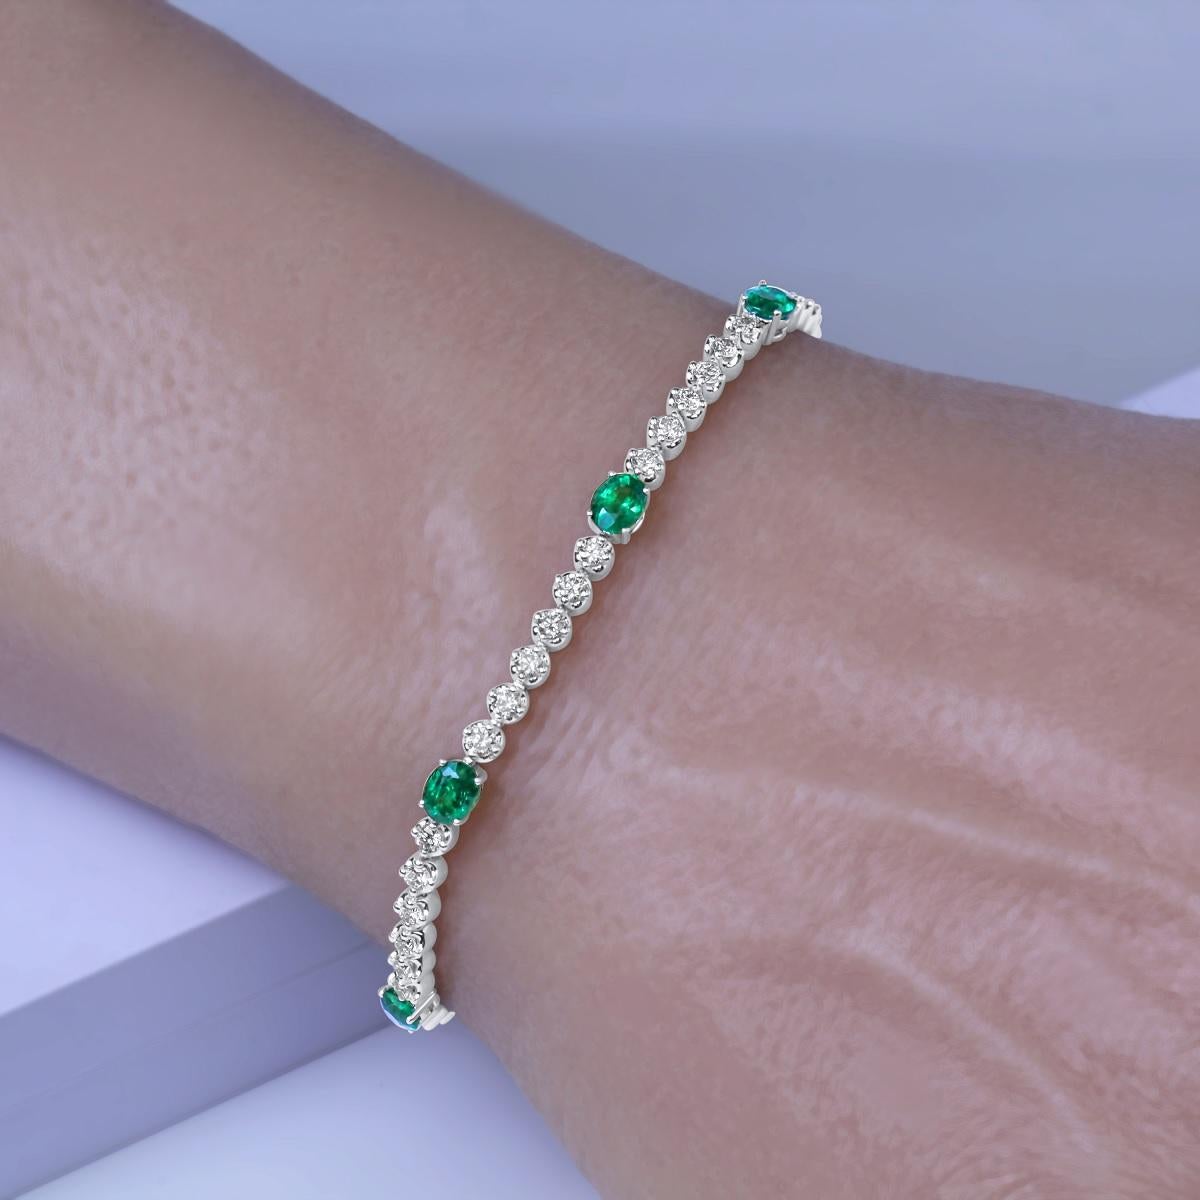 Indulge in luxury and sophistication with this breathtaking tennis bracelet that captures the essence of timeless beauty and glamour.

Seven mesmerizing oval-cut emeralds steal the spotlight, delicately interspersed with rows of brilliant round